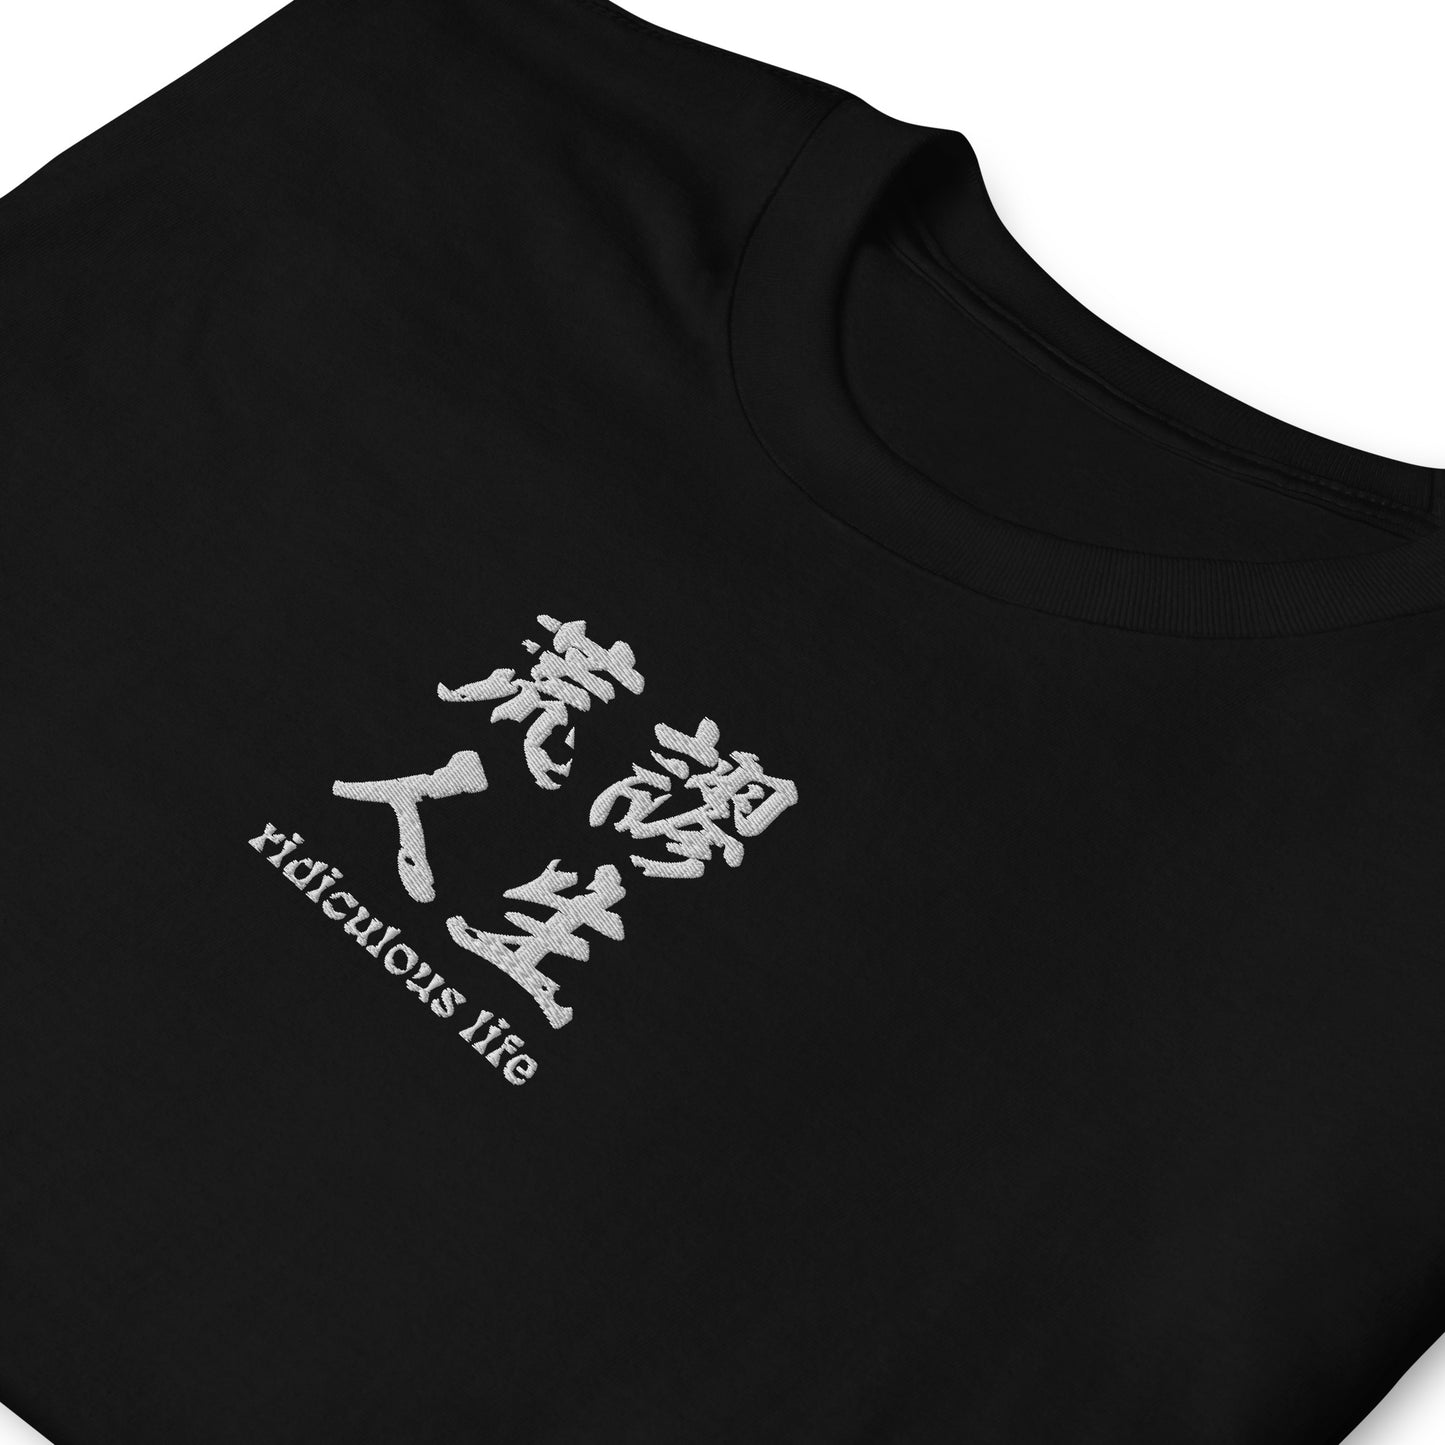 Black High Quality Tee - Front Design with an Black Embroidery "Ridiculous Life" in Chinese and English 